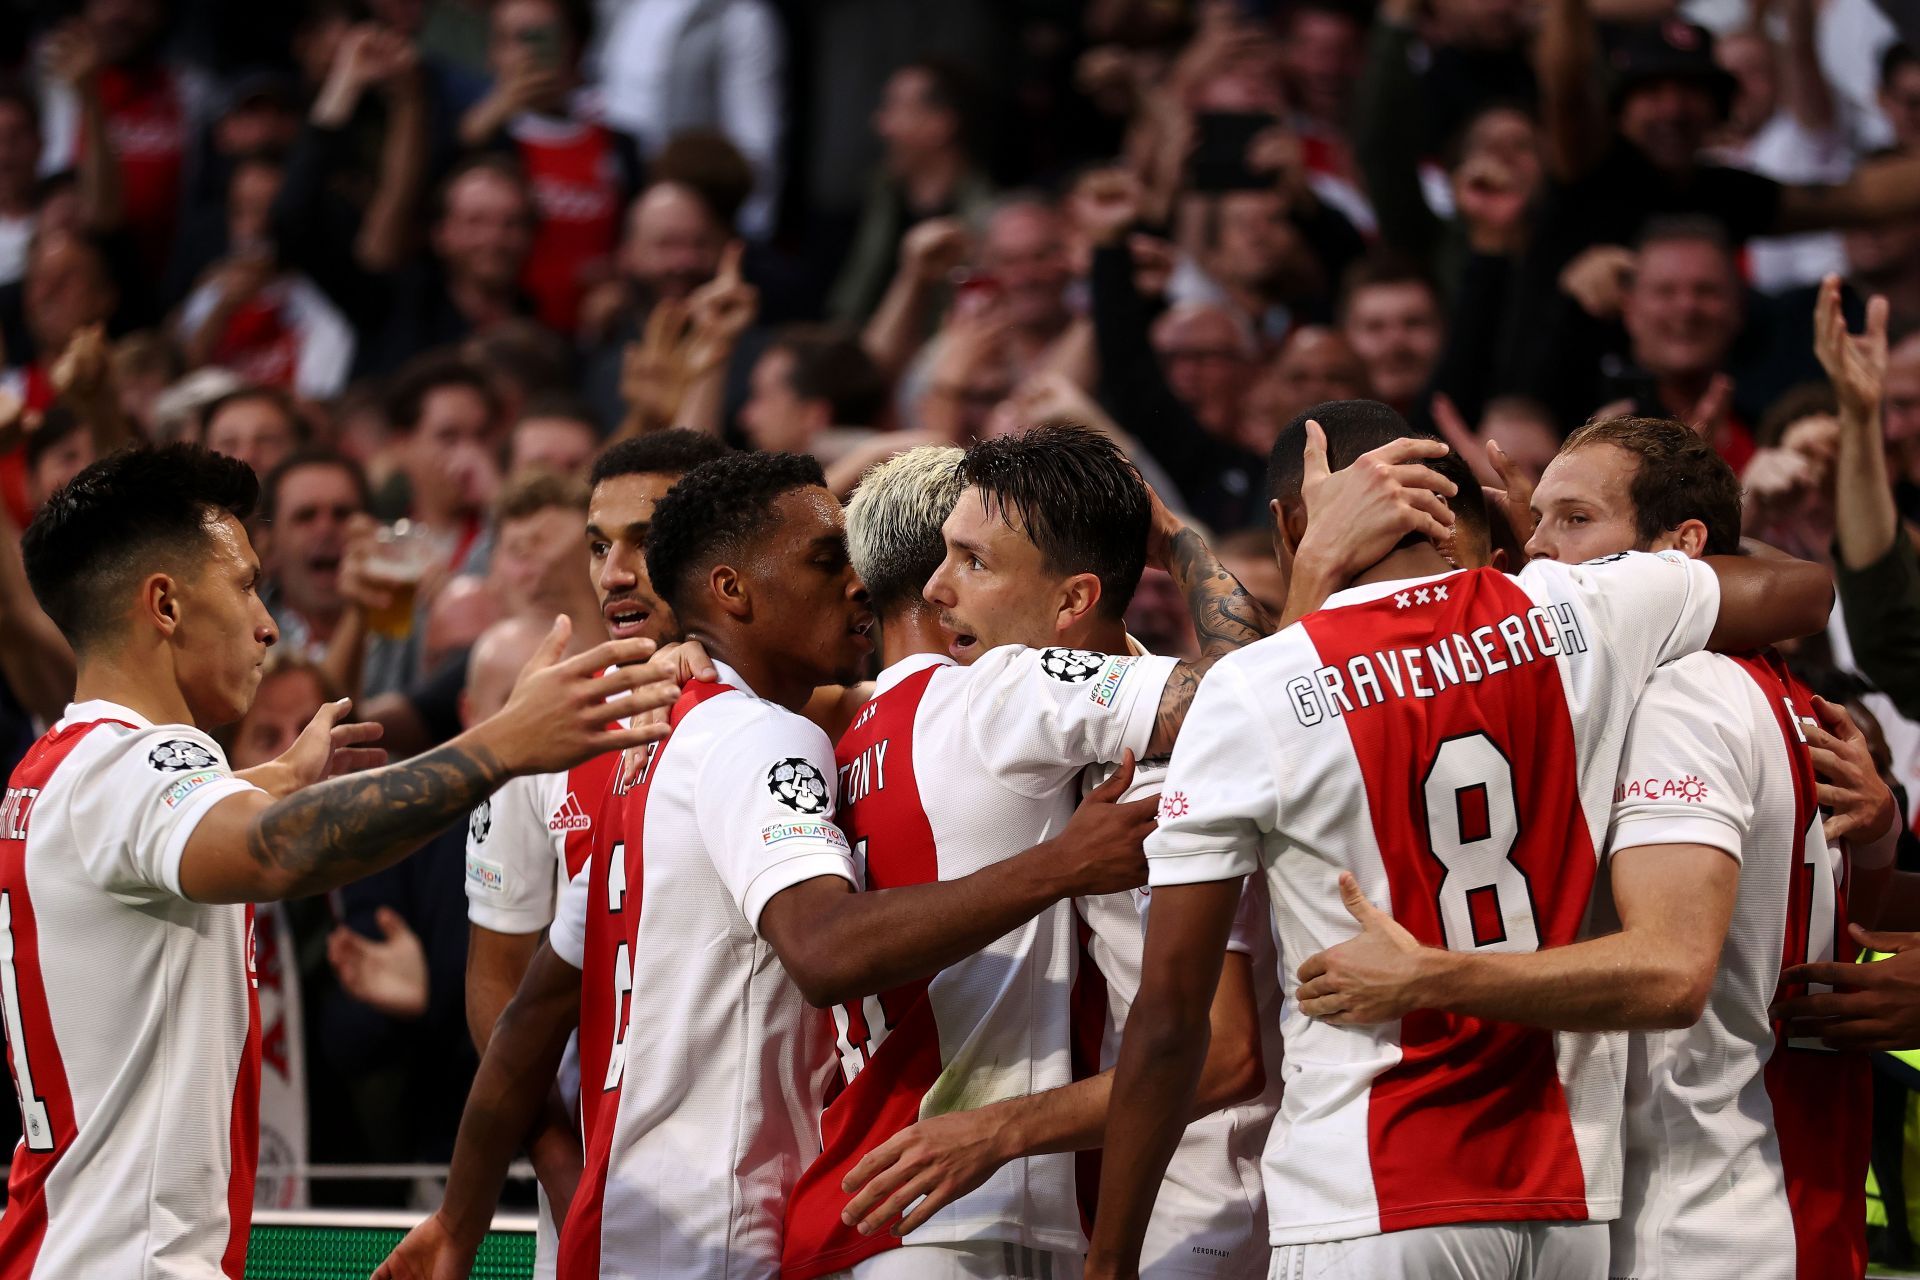 AFC Ajax will face Heracles on Saturday